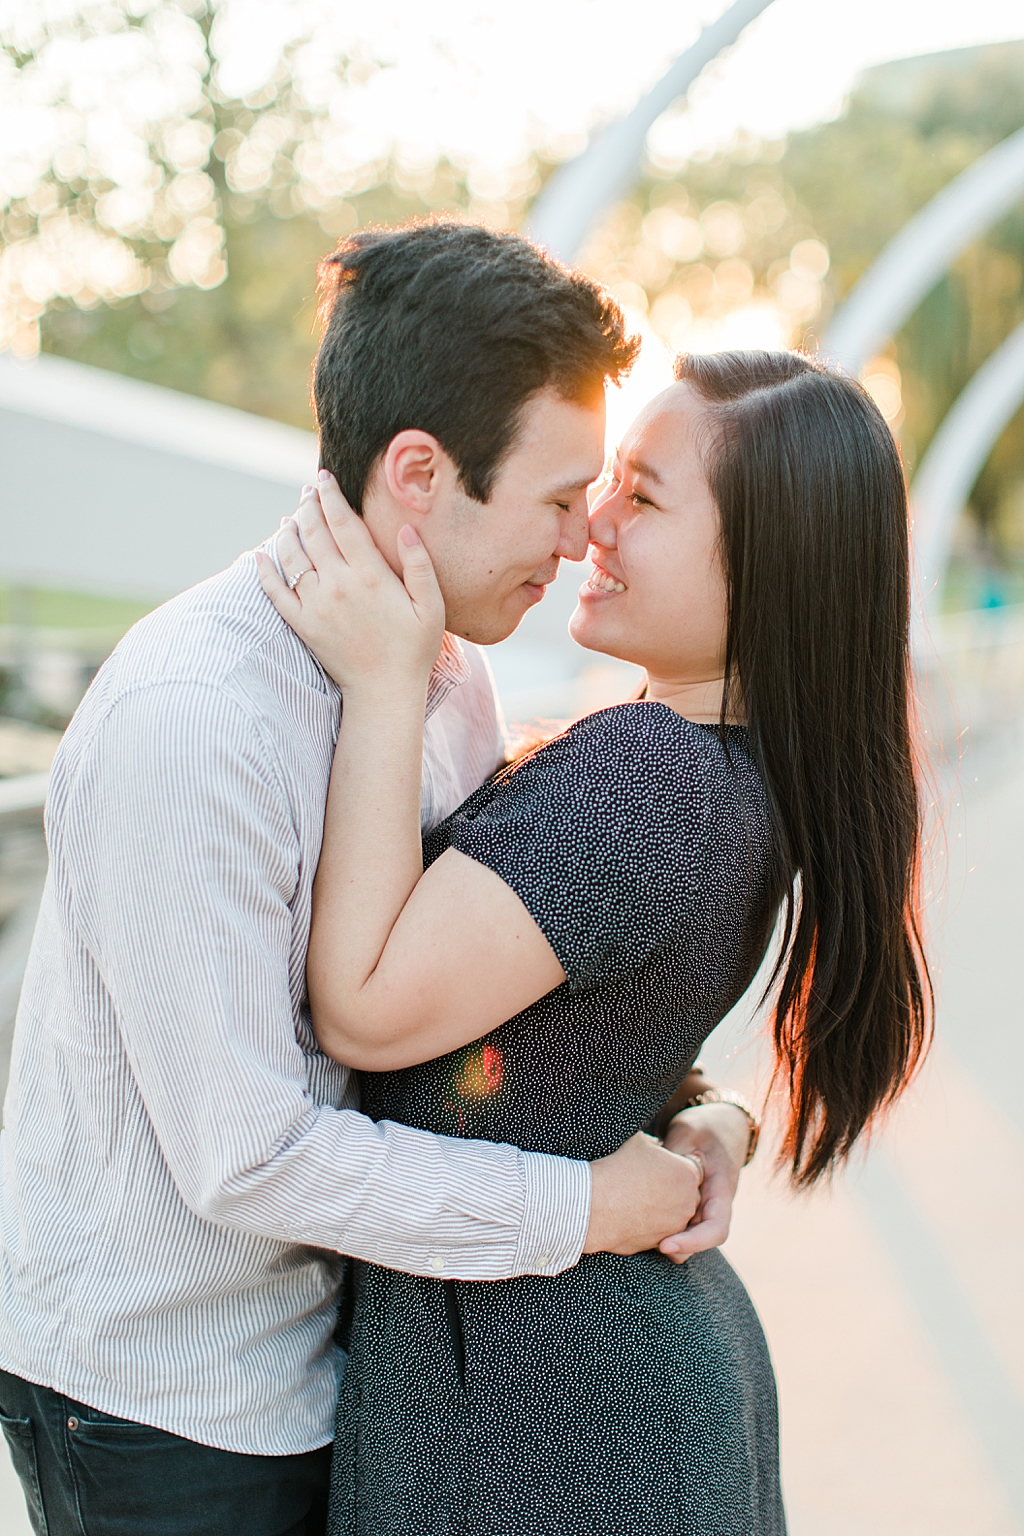 Becky_Collin_Navy_Yards_Park_The_Wharf_Washington_DC_Fall_Engagement_Session_AngelikaJohnsPhotography-8031.jpg